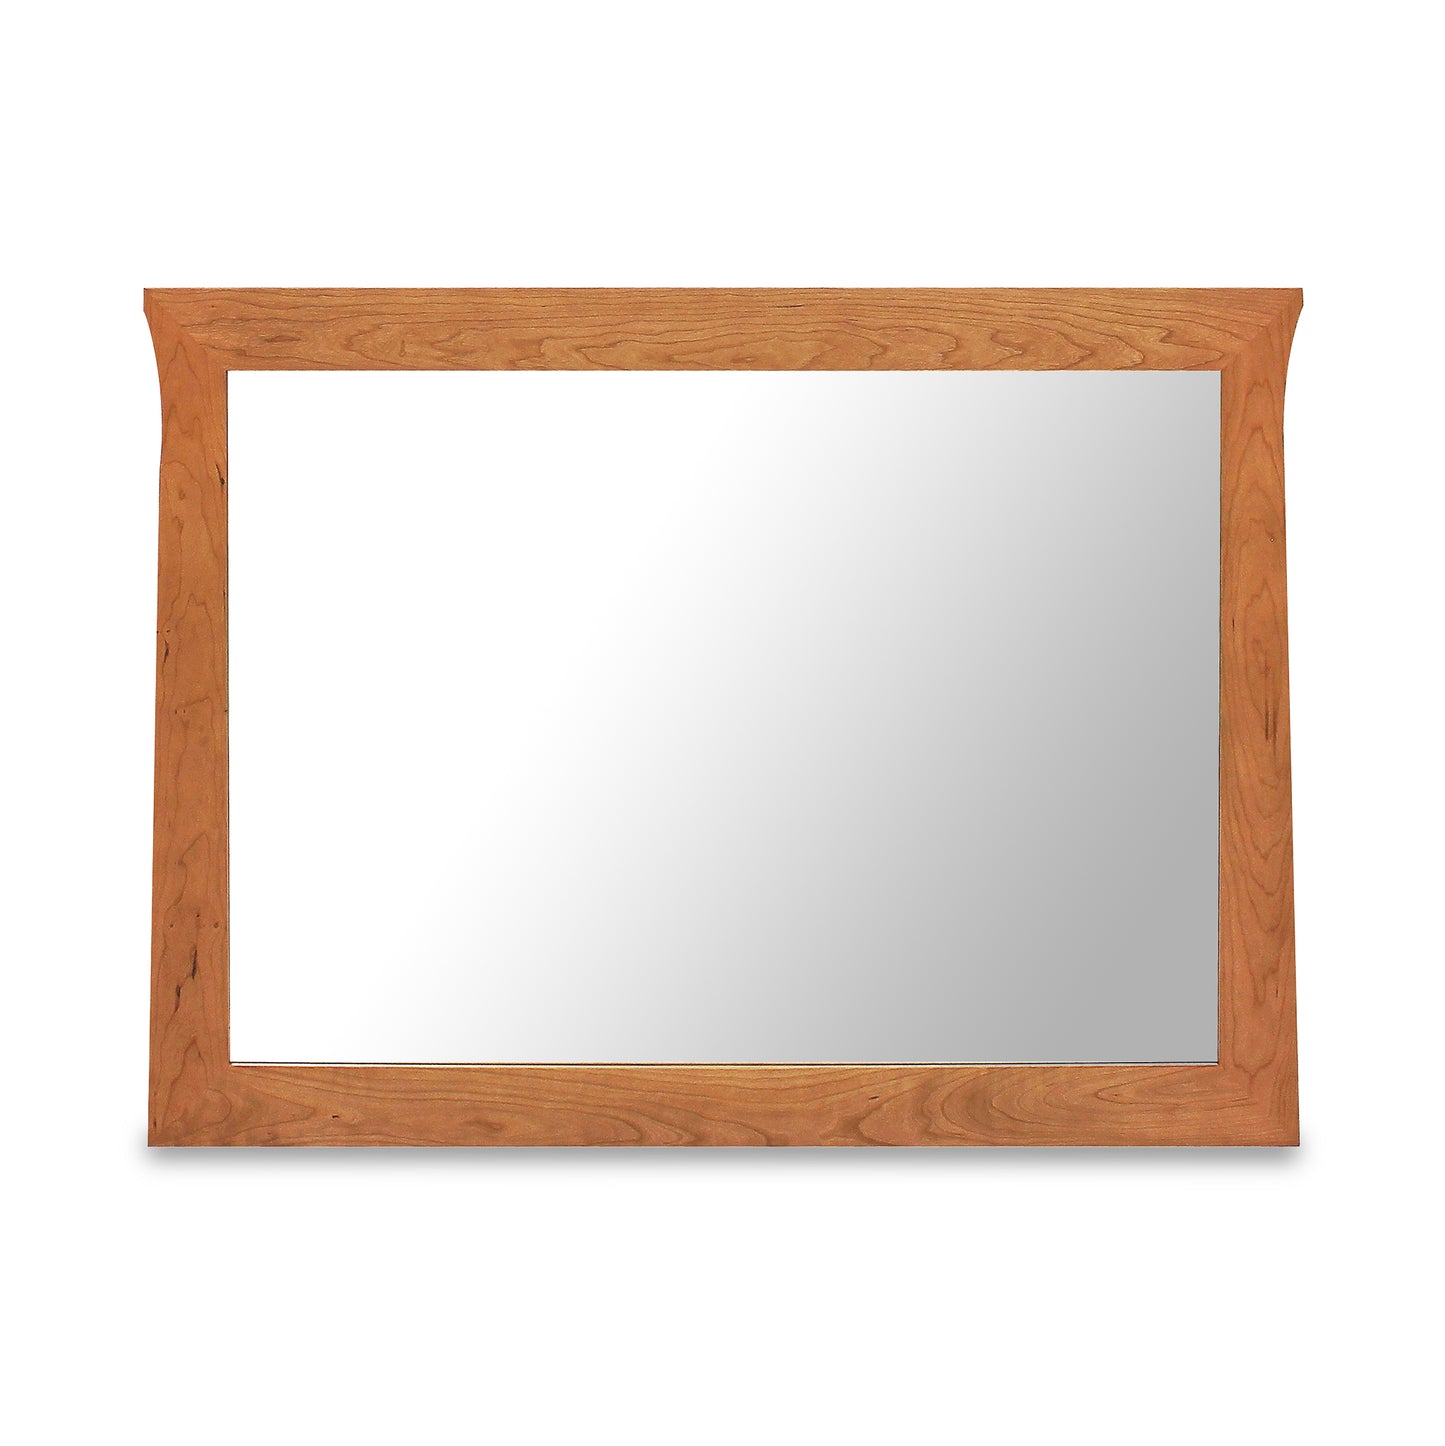 A Lyndon Furniture Andrews Dresser Mirror with a wooden frame on a white background.